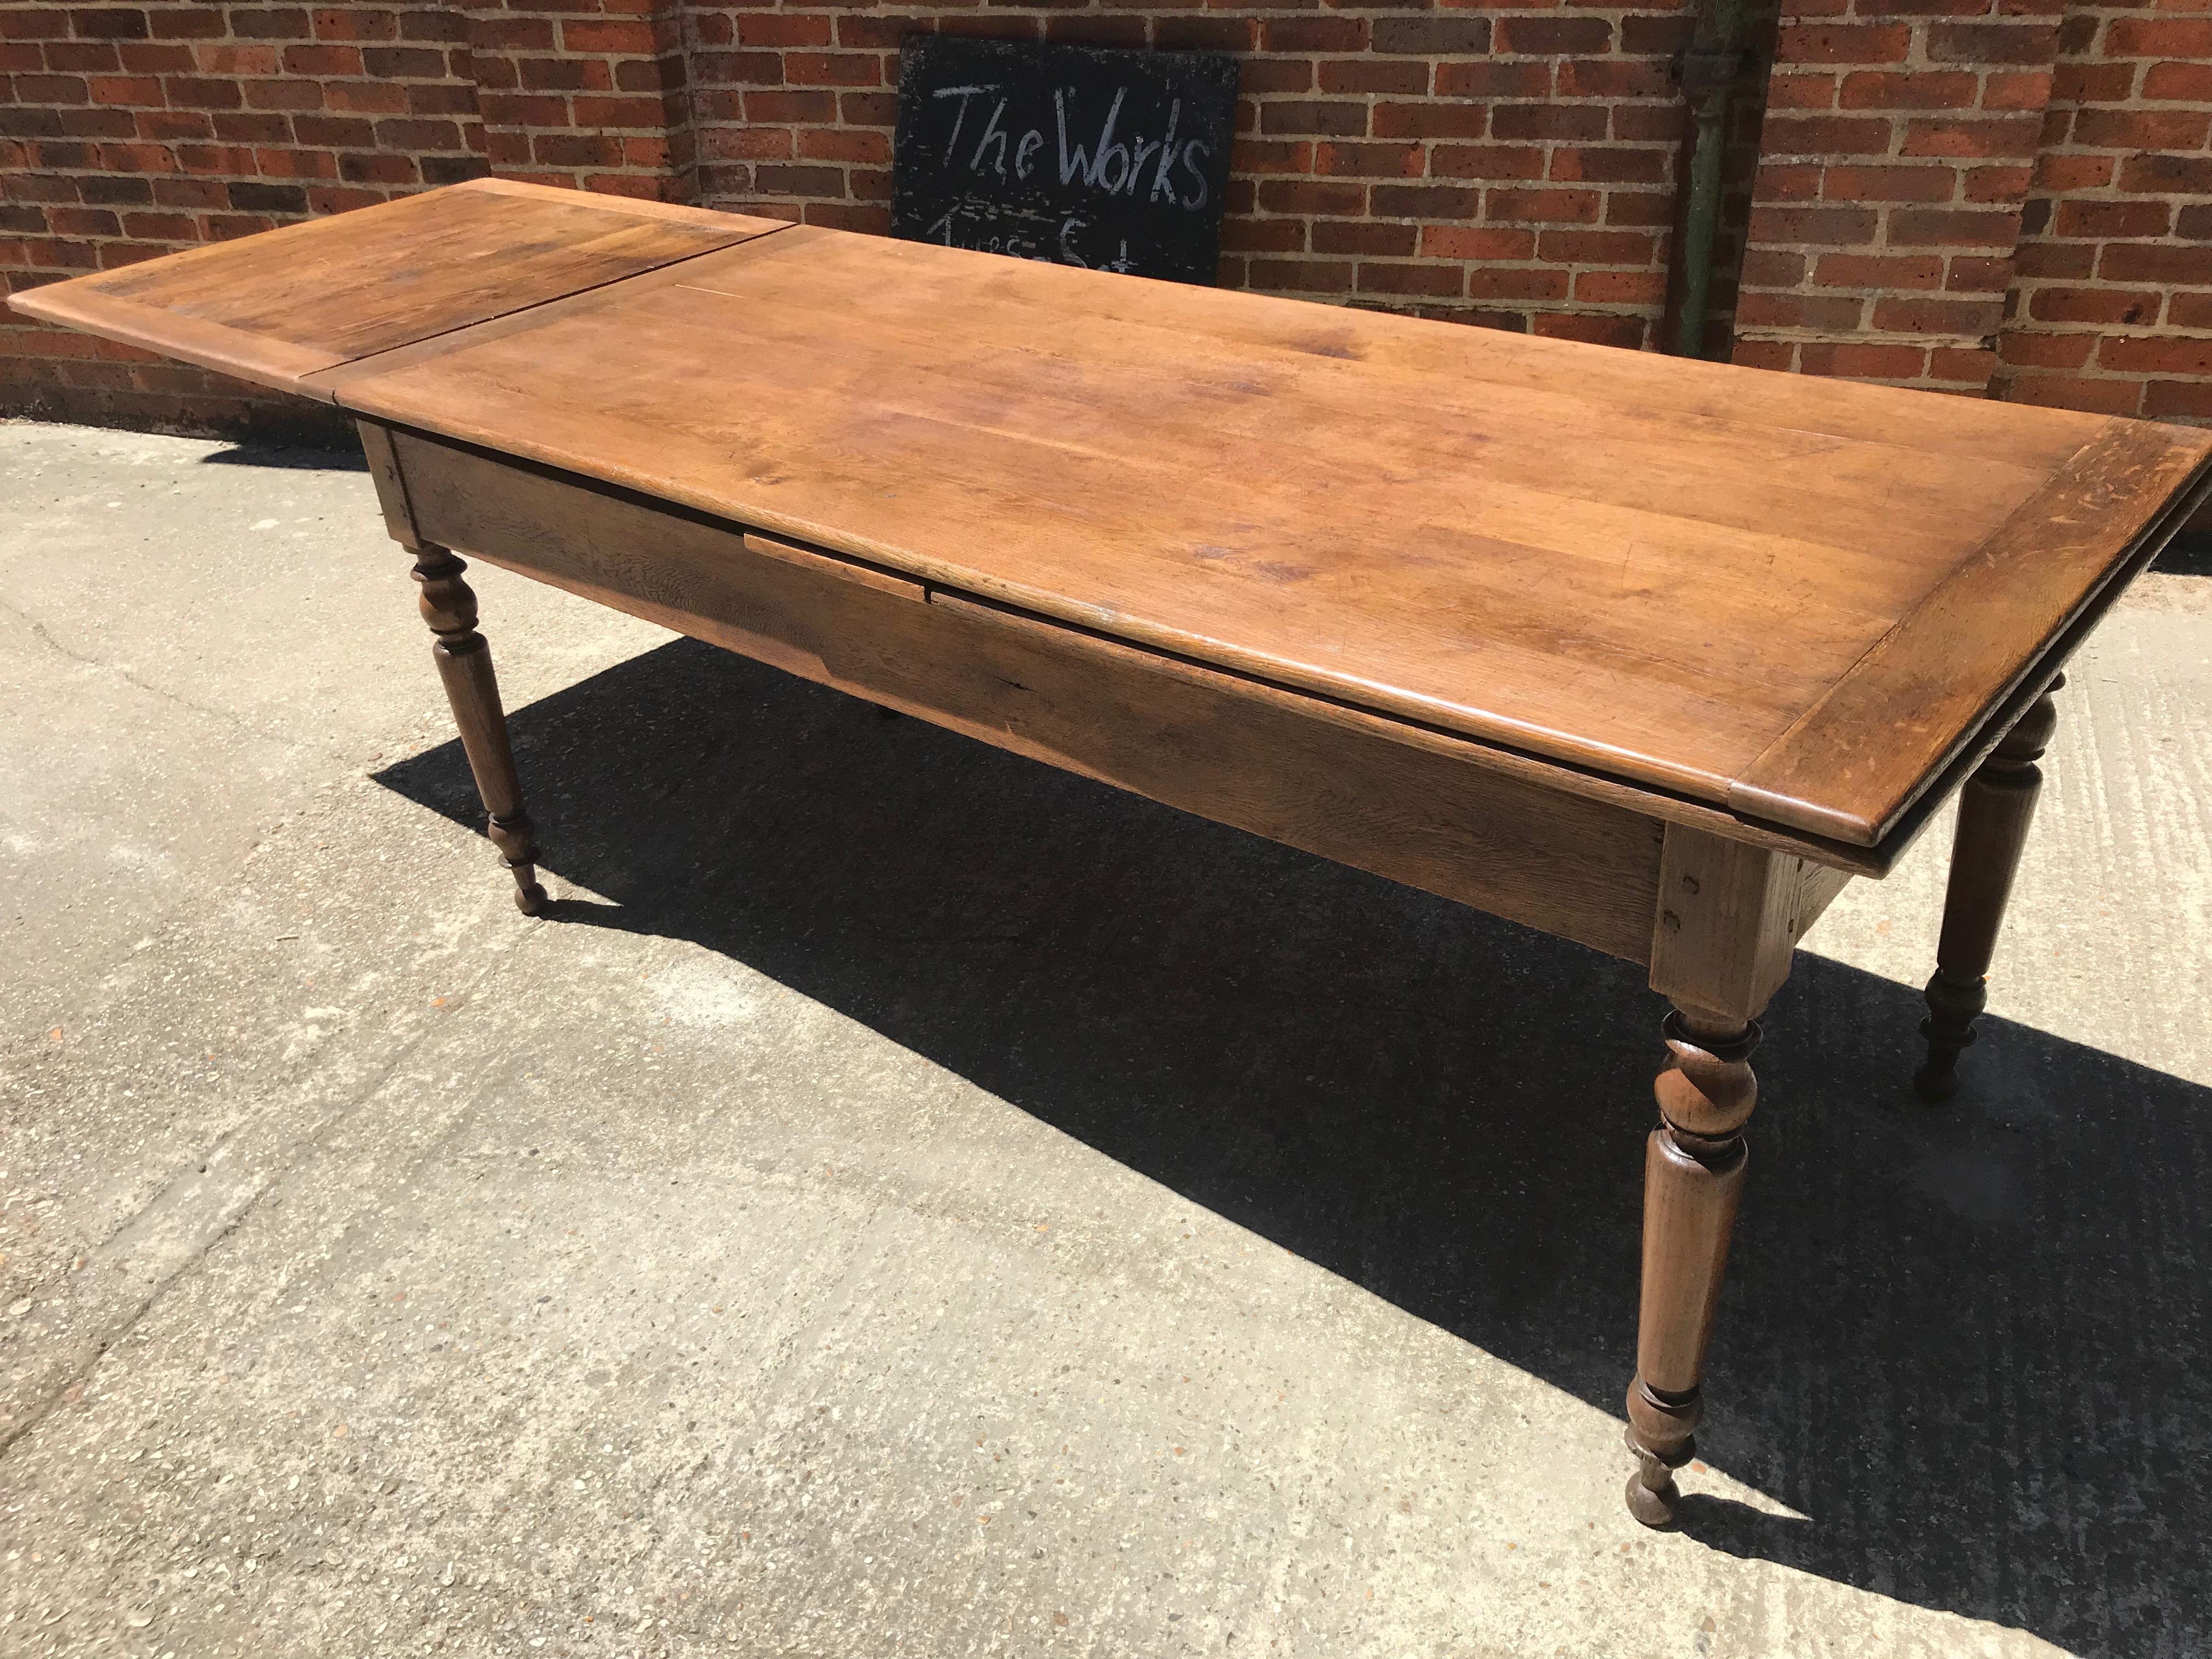 Antique oak double extending table with round legs and gorgeous patina. This table can extend on both sides and would seat up to 12 people comfortably. You can use this table as a eight-seat with both extensions tucked in, or with one extending side